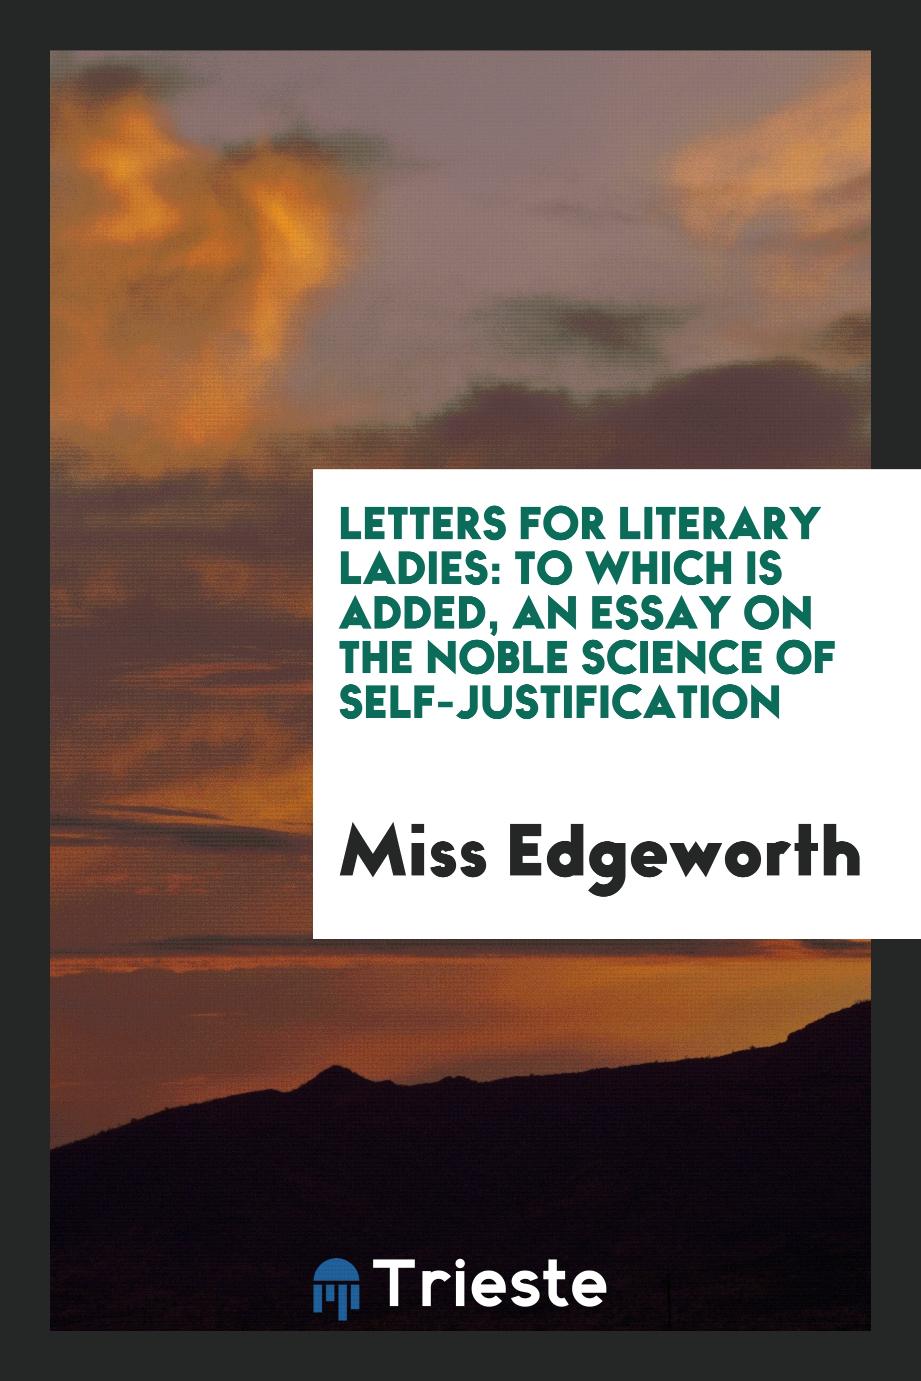 Letters for literary ladies: to which is added, an essay on the noble science of self-justification